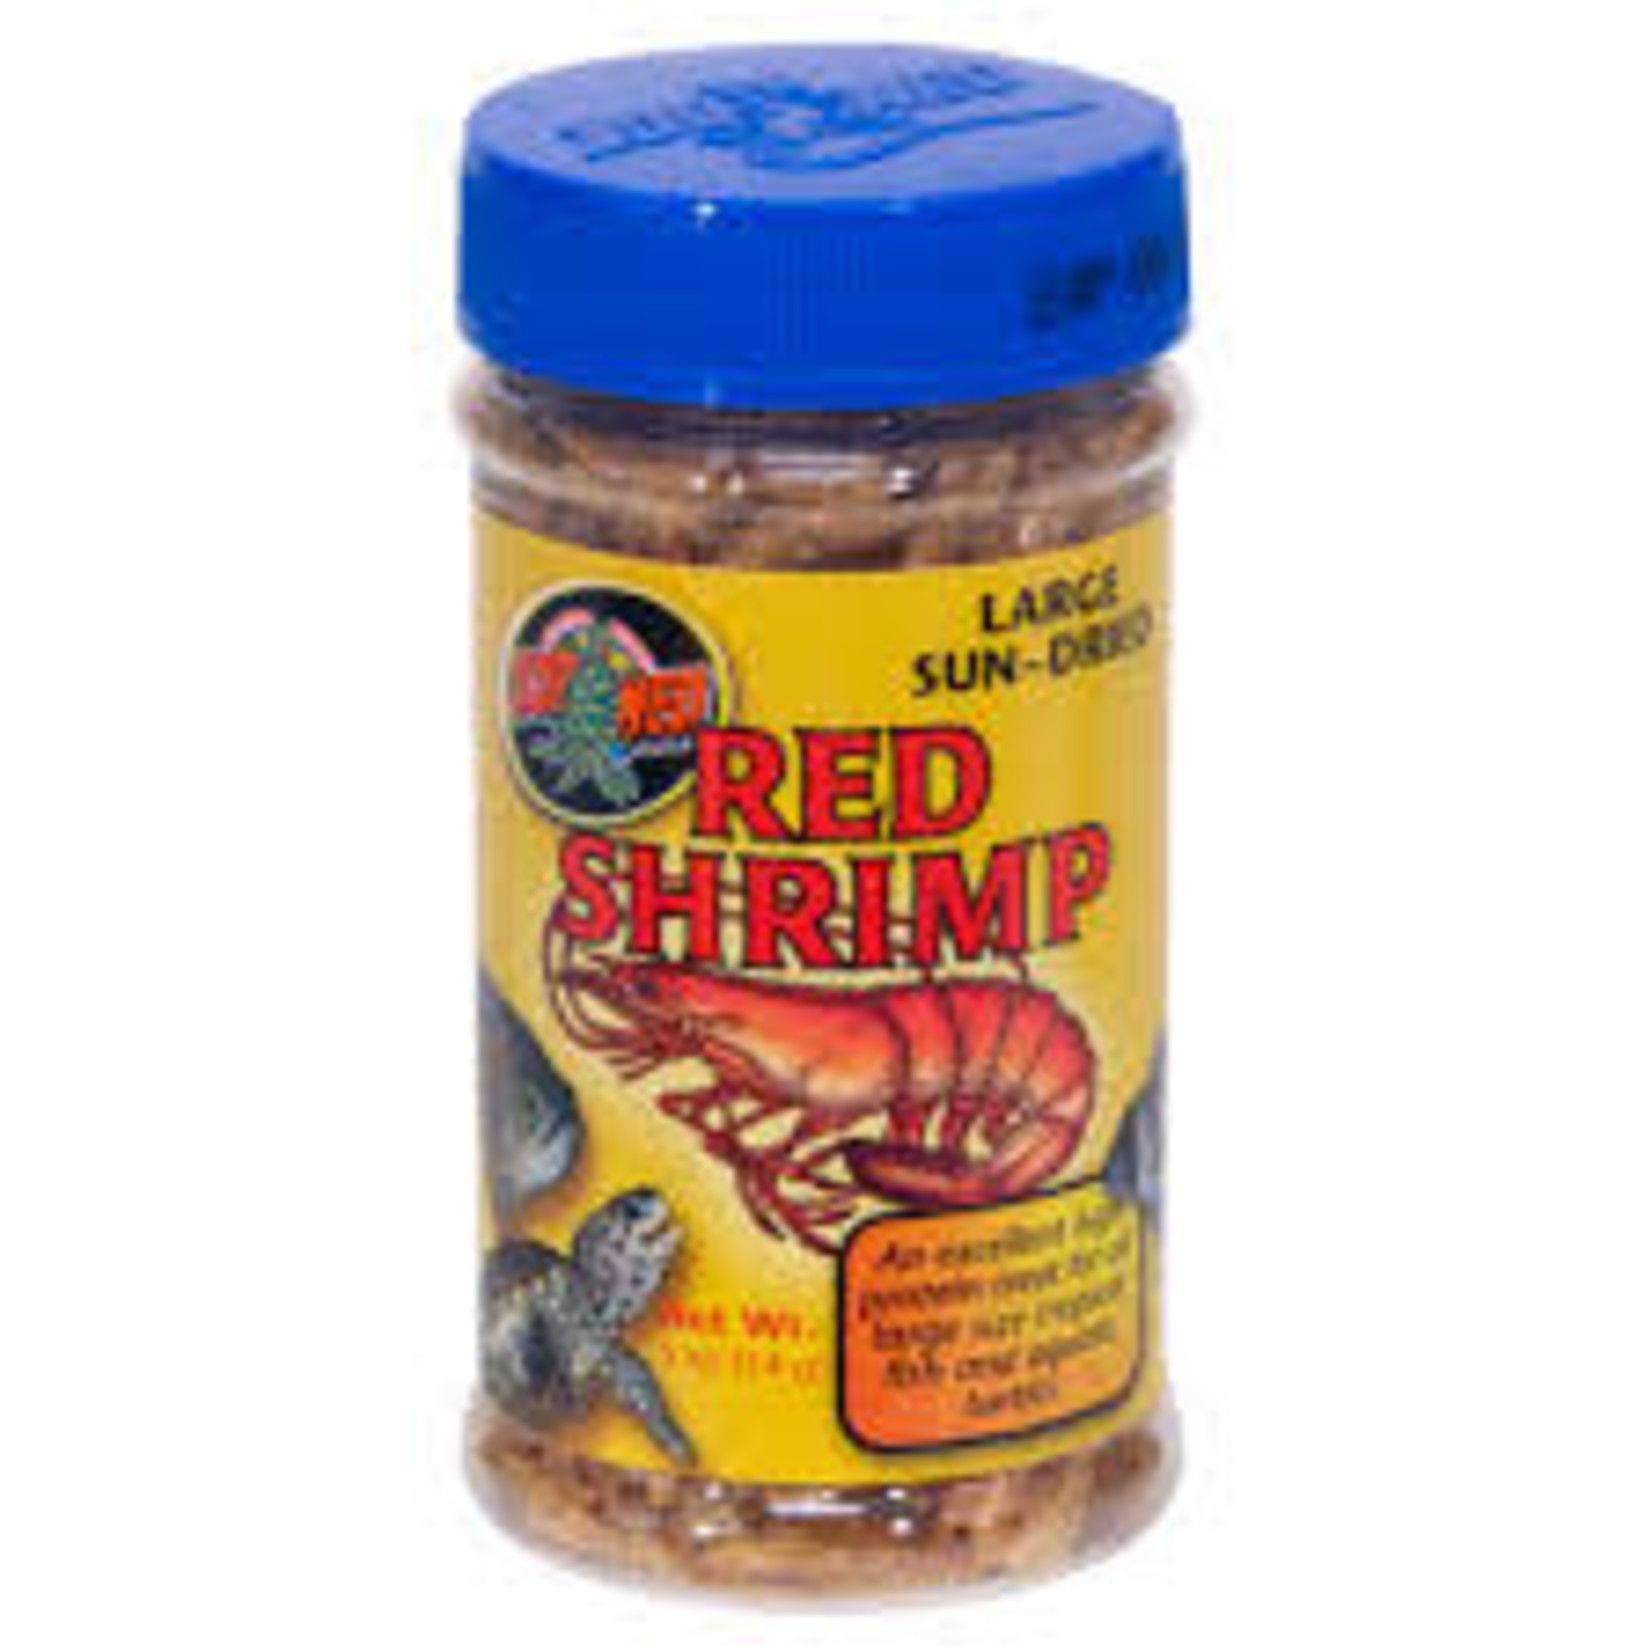 (W) Zoo Med Large Sun-Dried Red Shrimp - 0.5 oz